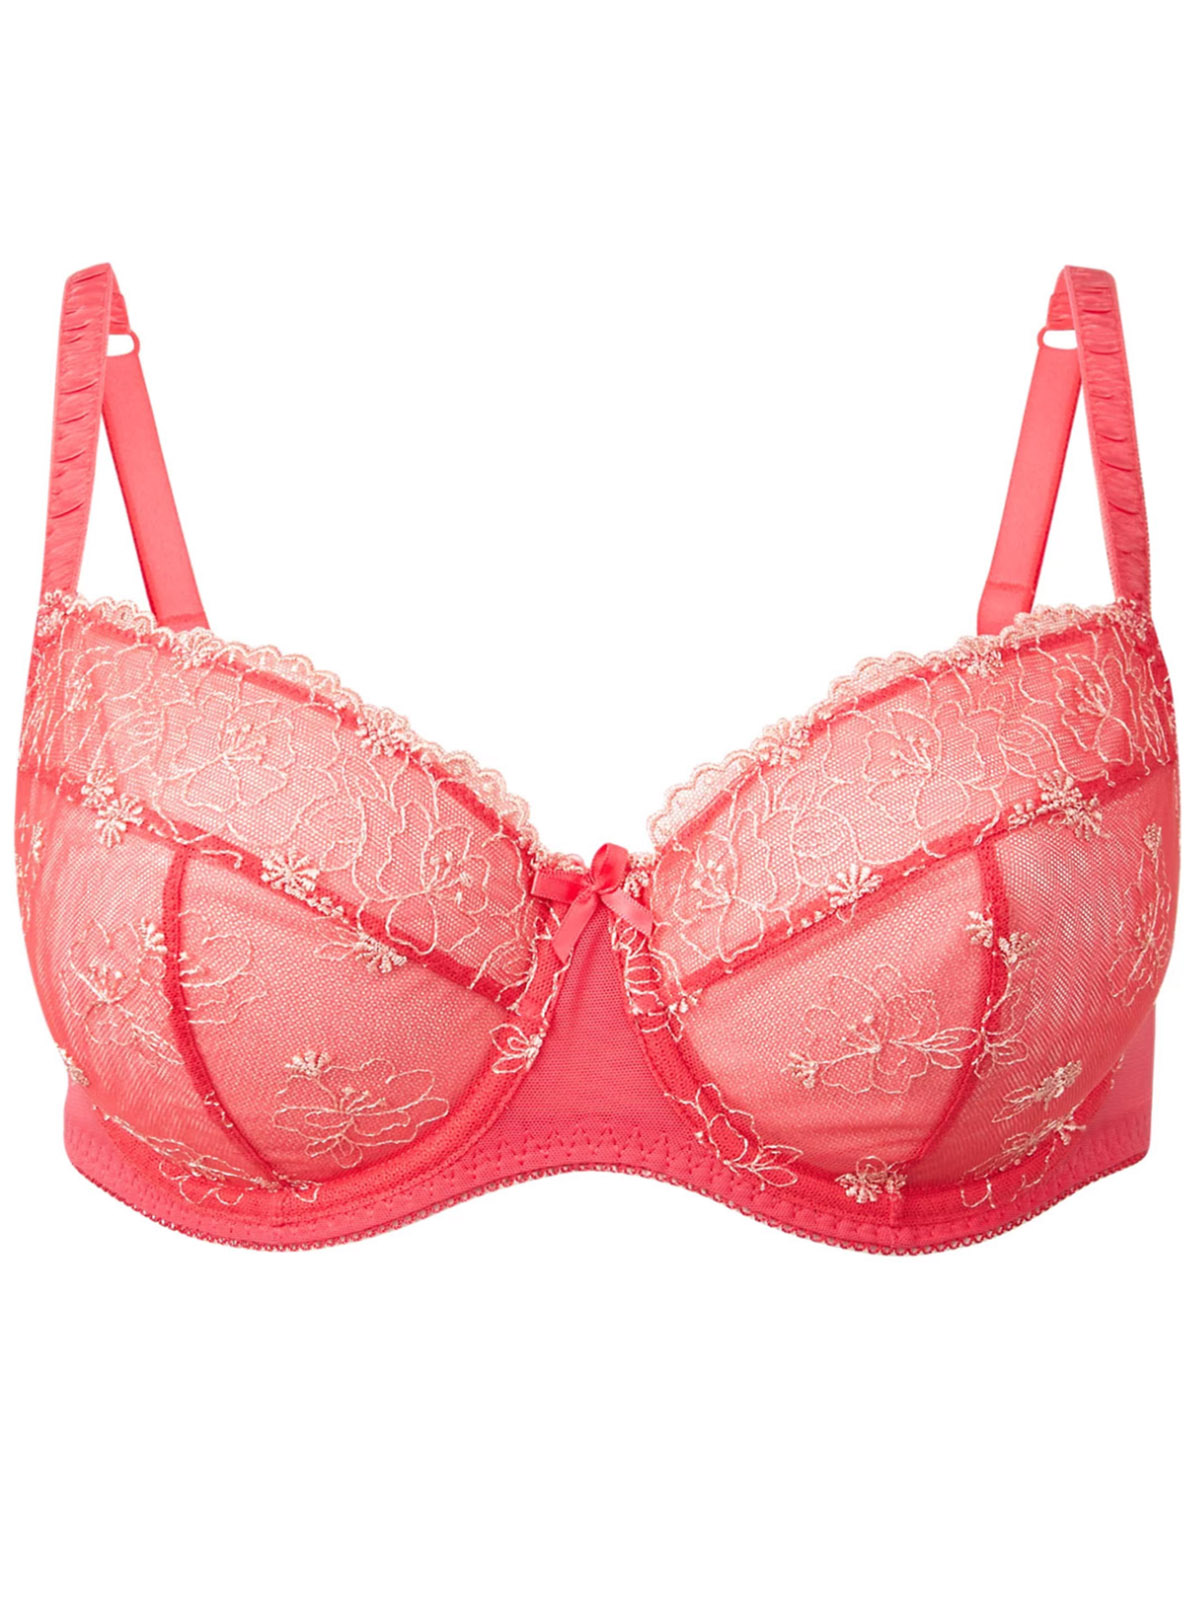  - - STRAWBERRY Embroidered Padded Plunge Bra - Size 32 to 40 (A-B-C-D)